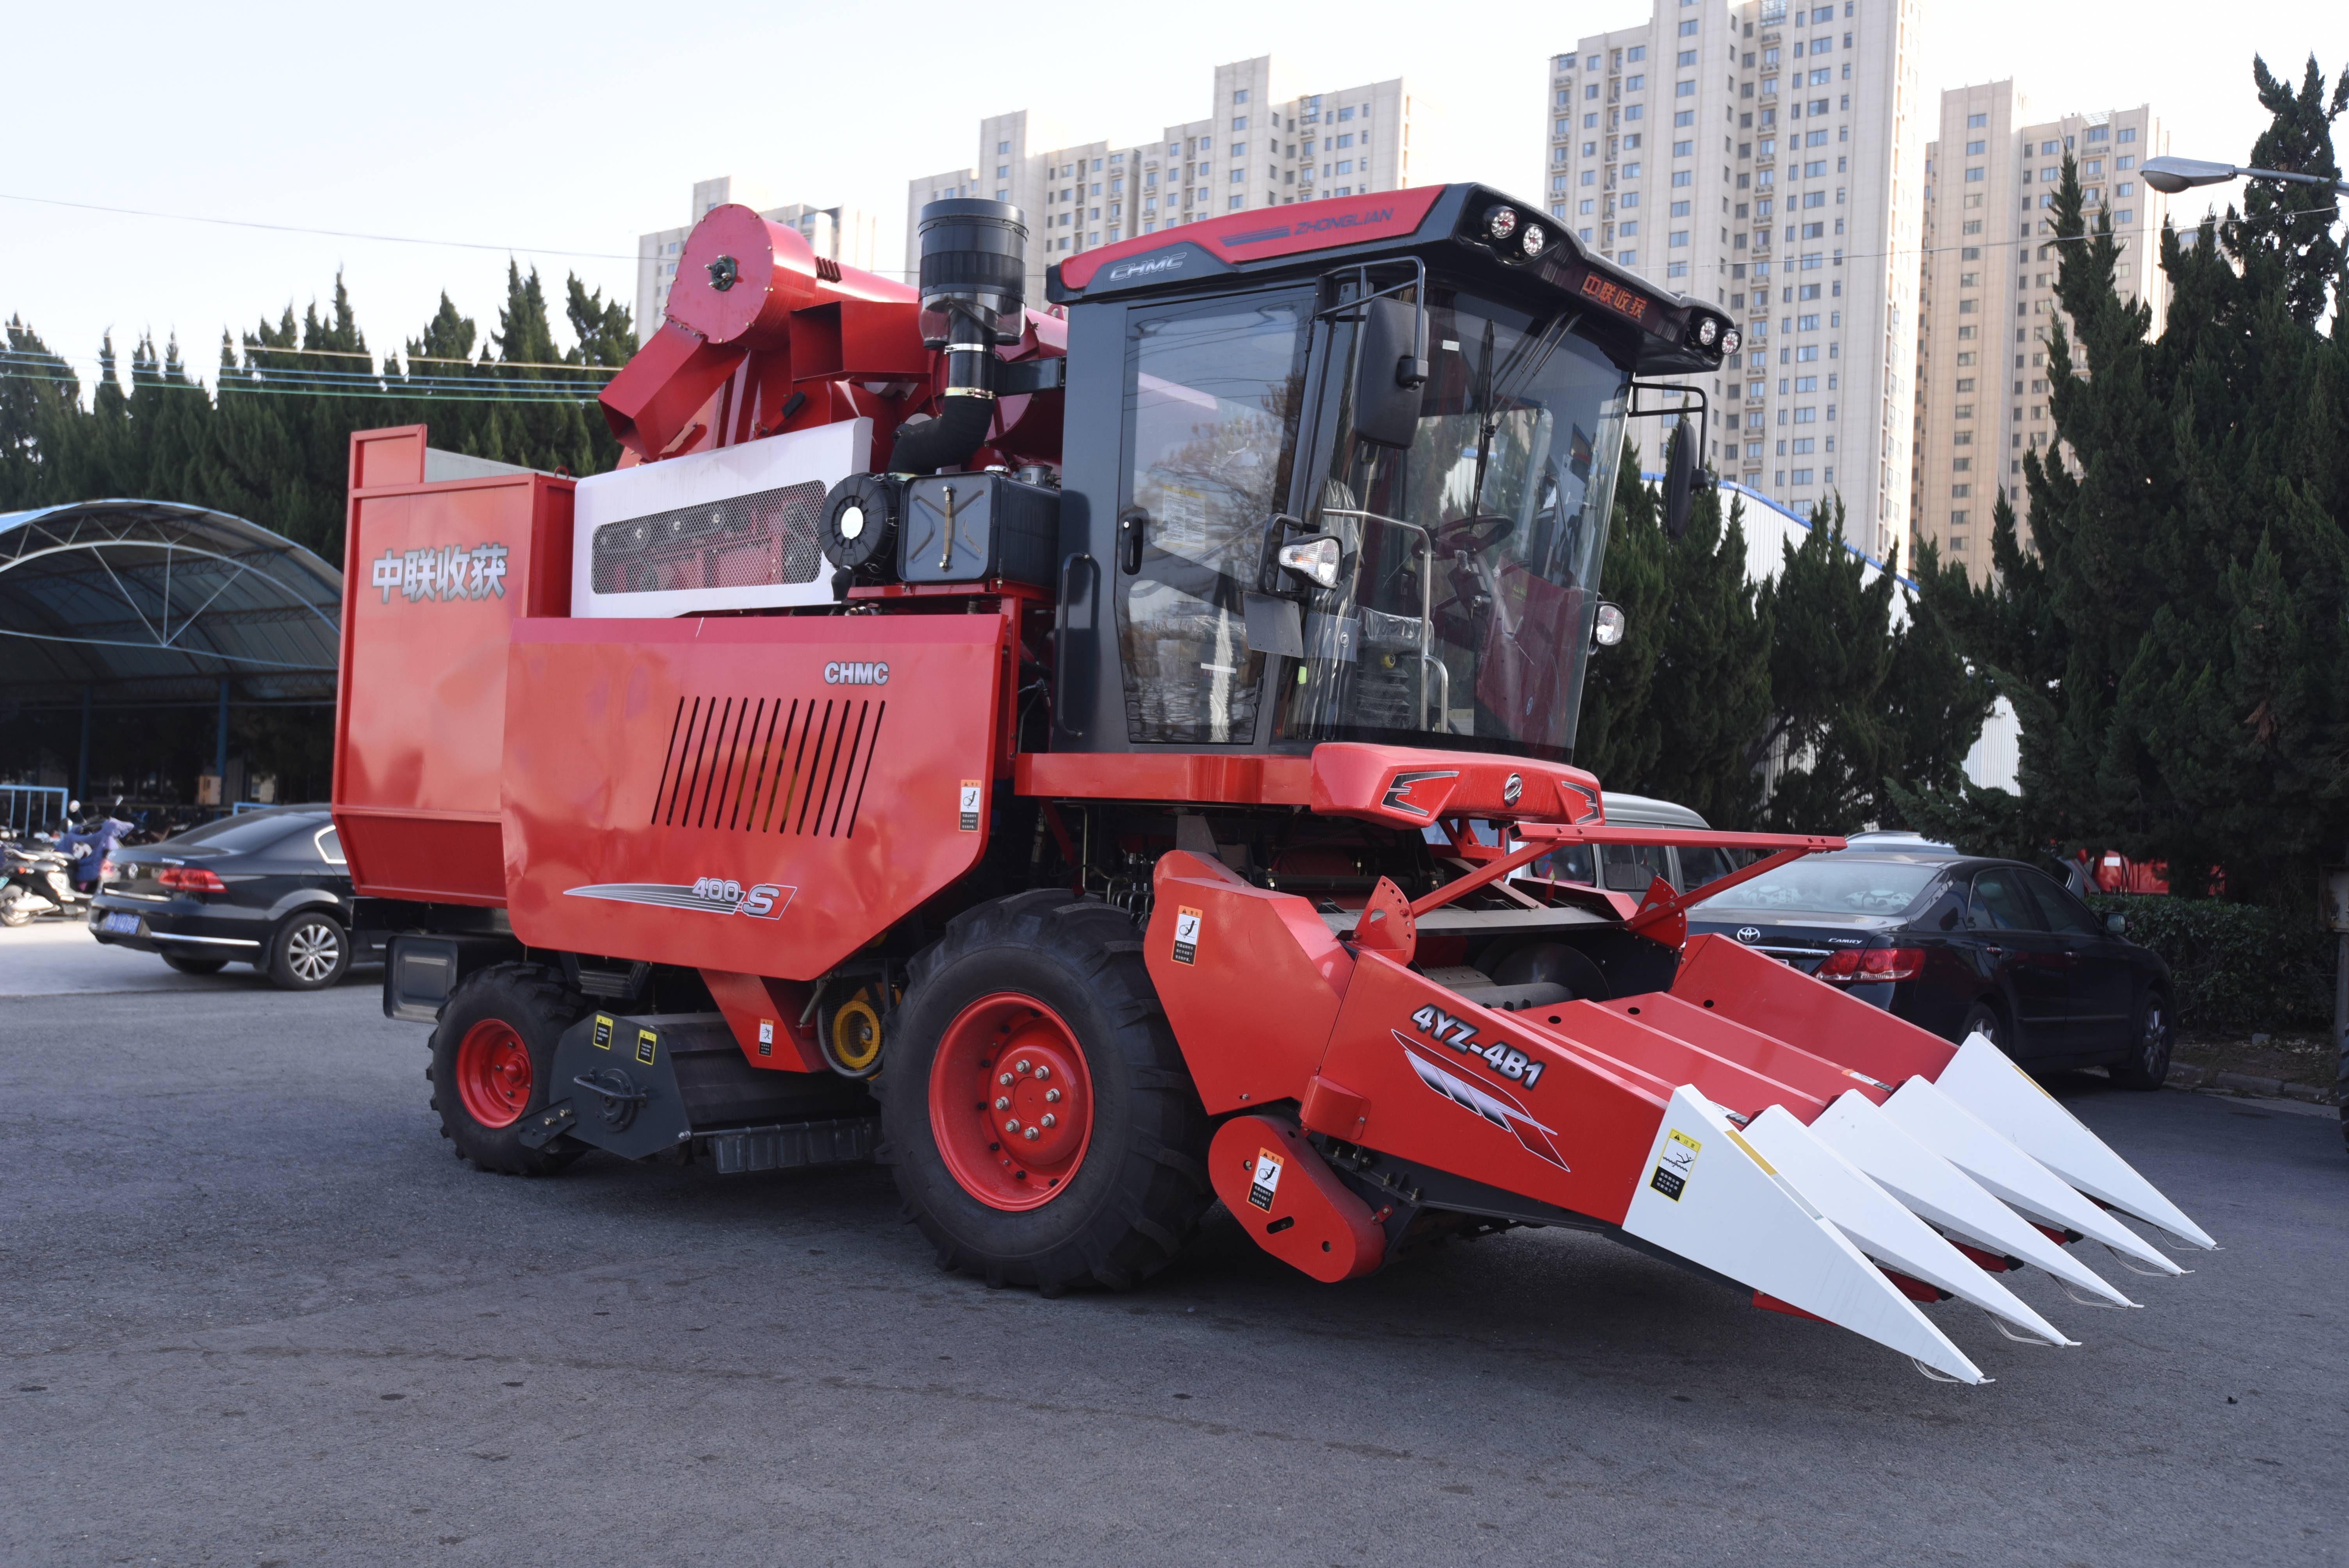 Super-powerful and Latest Model of Large Corn Harvester For 